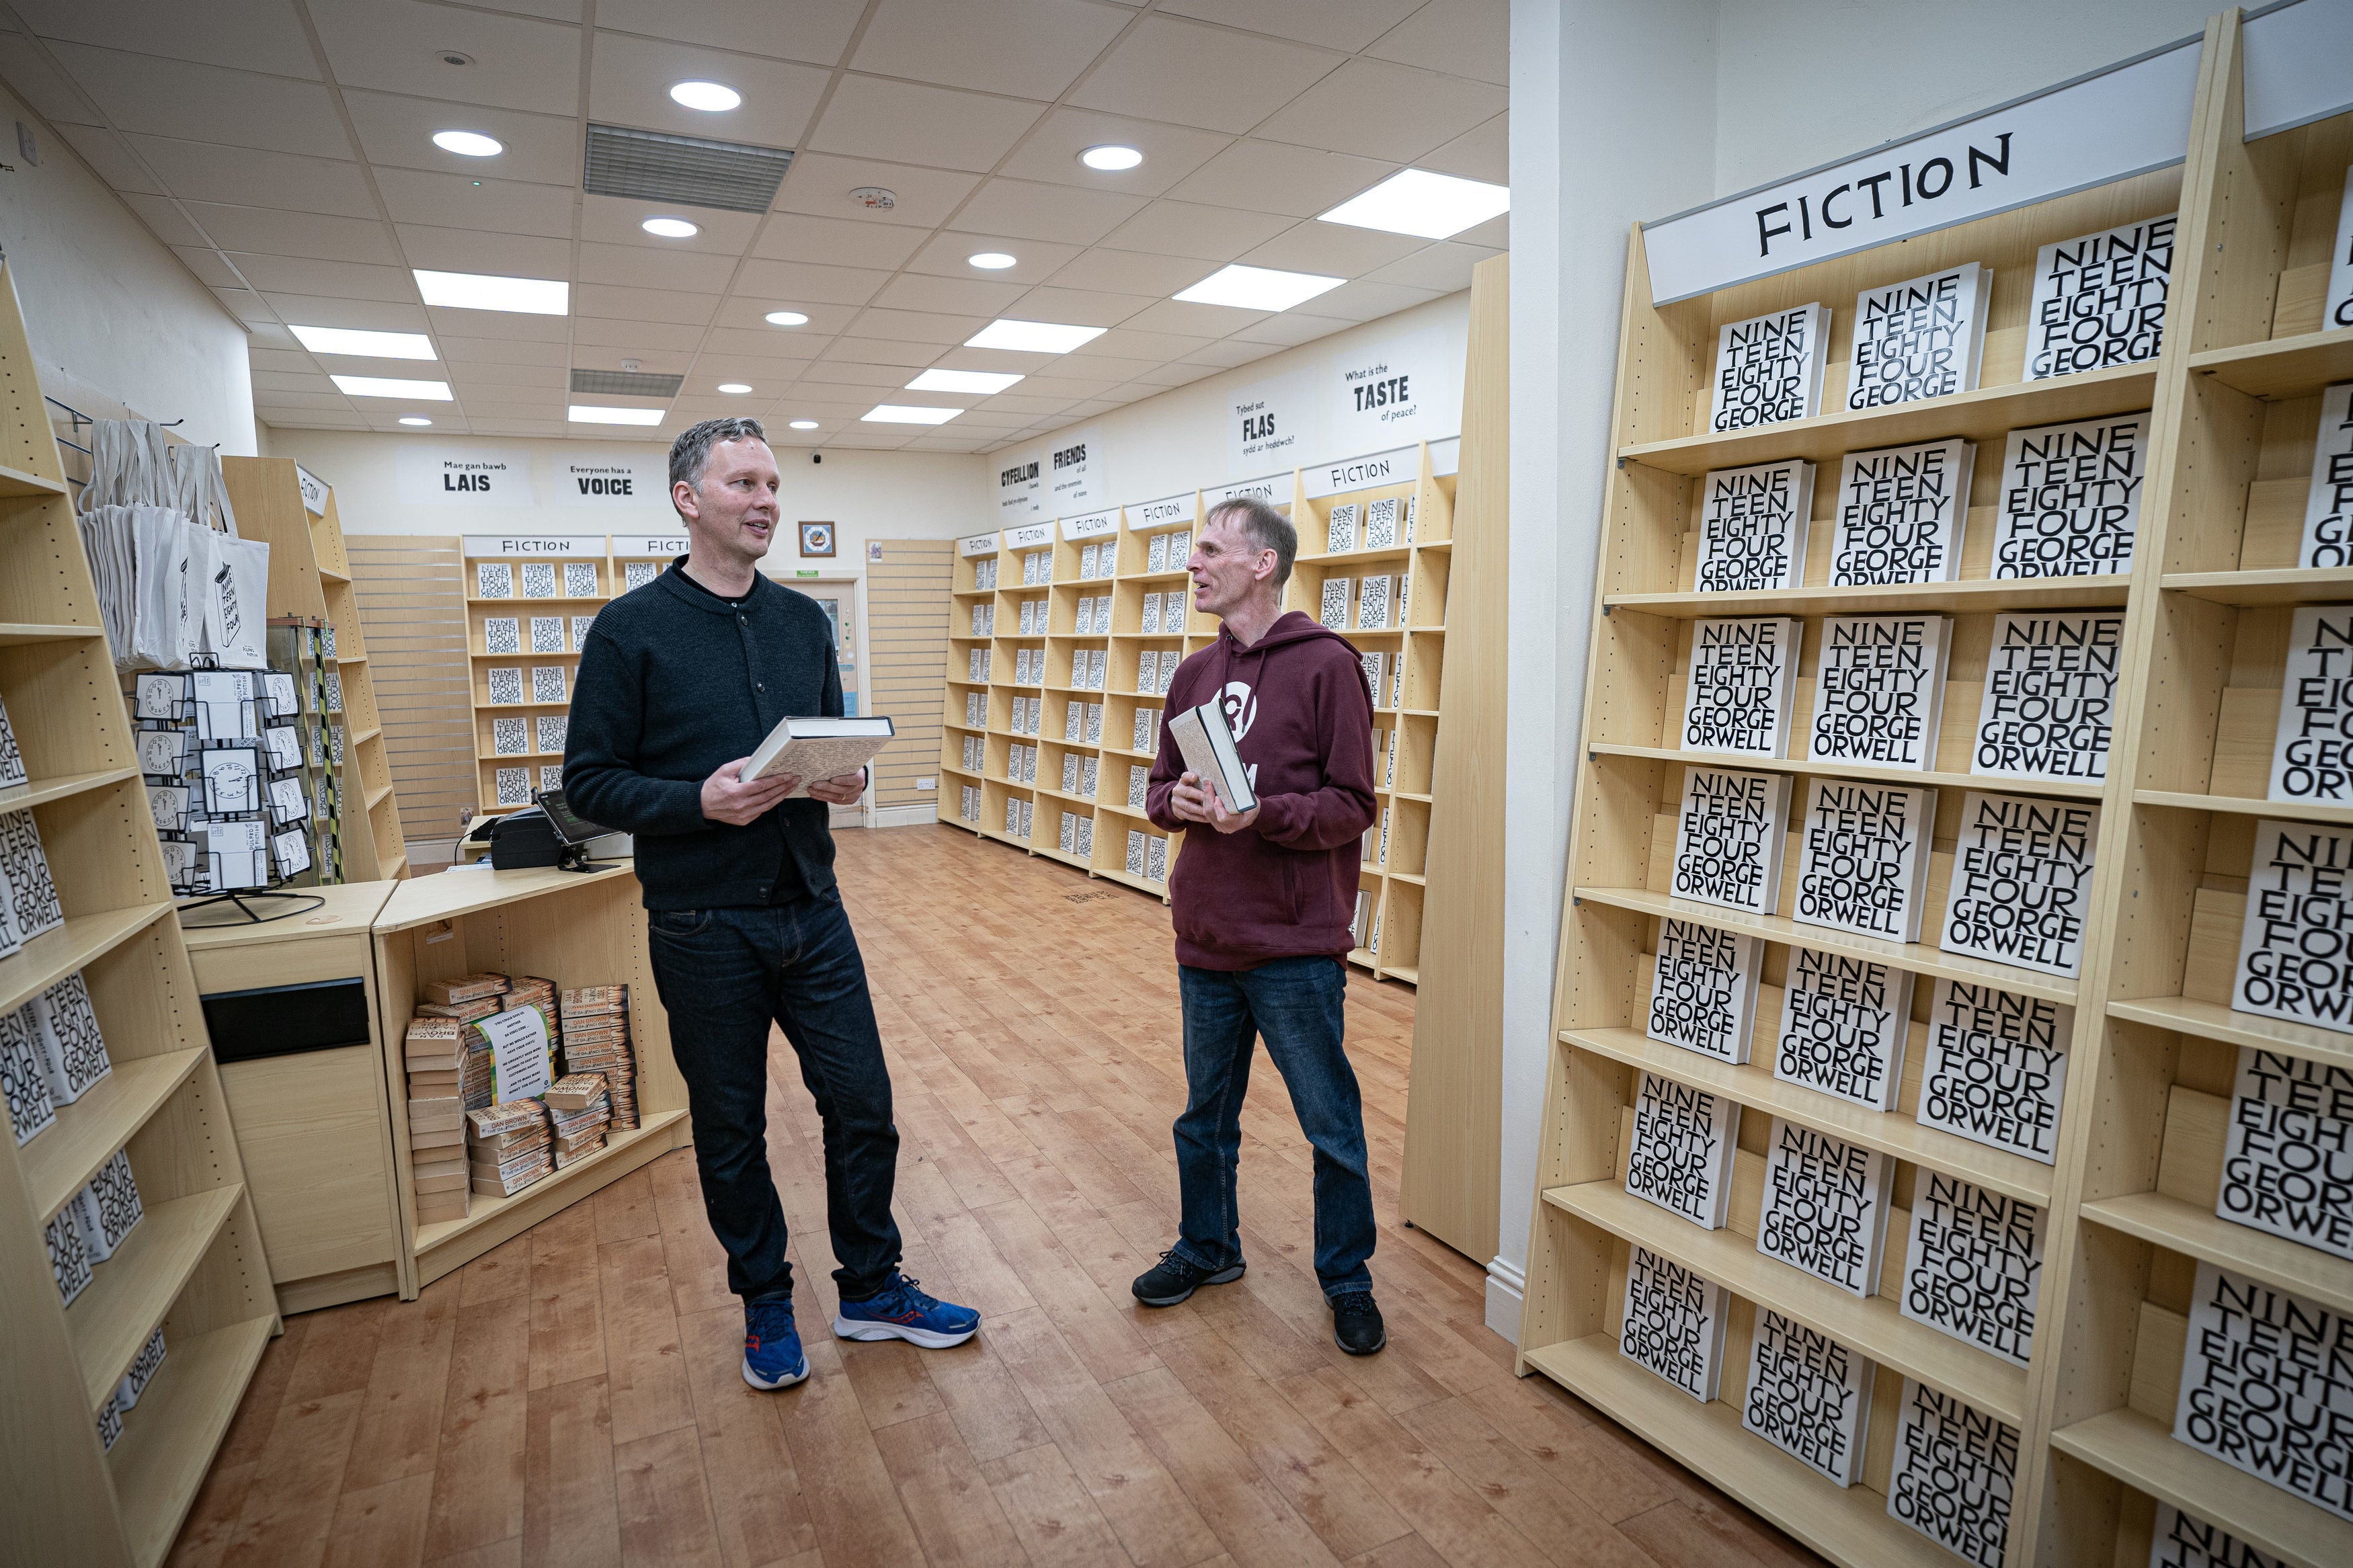 Shrigley in conversation with the manager of the Swansea Oxfam shop where this story began